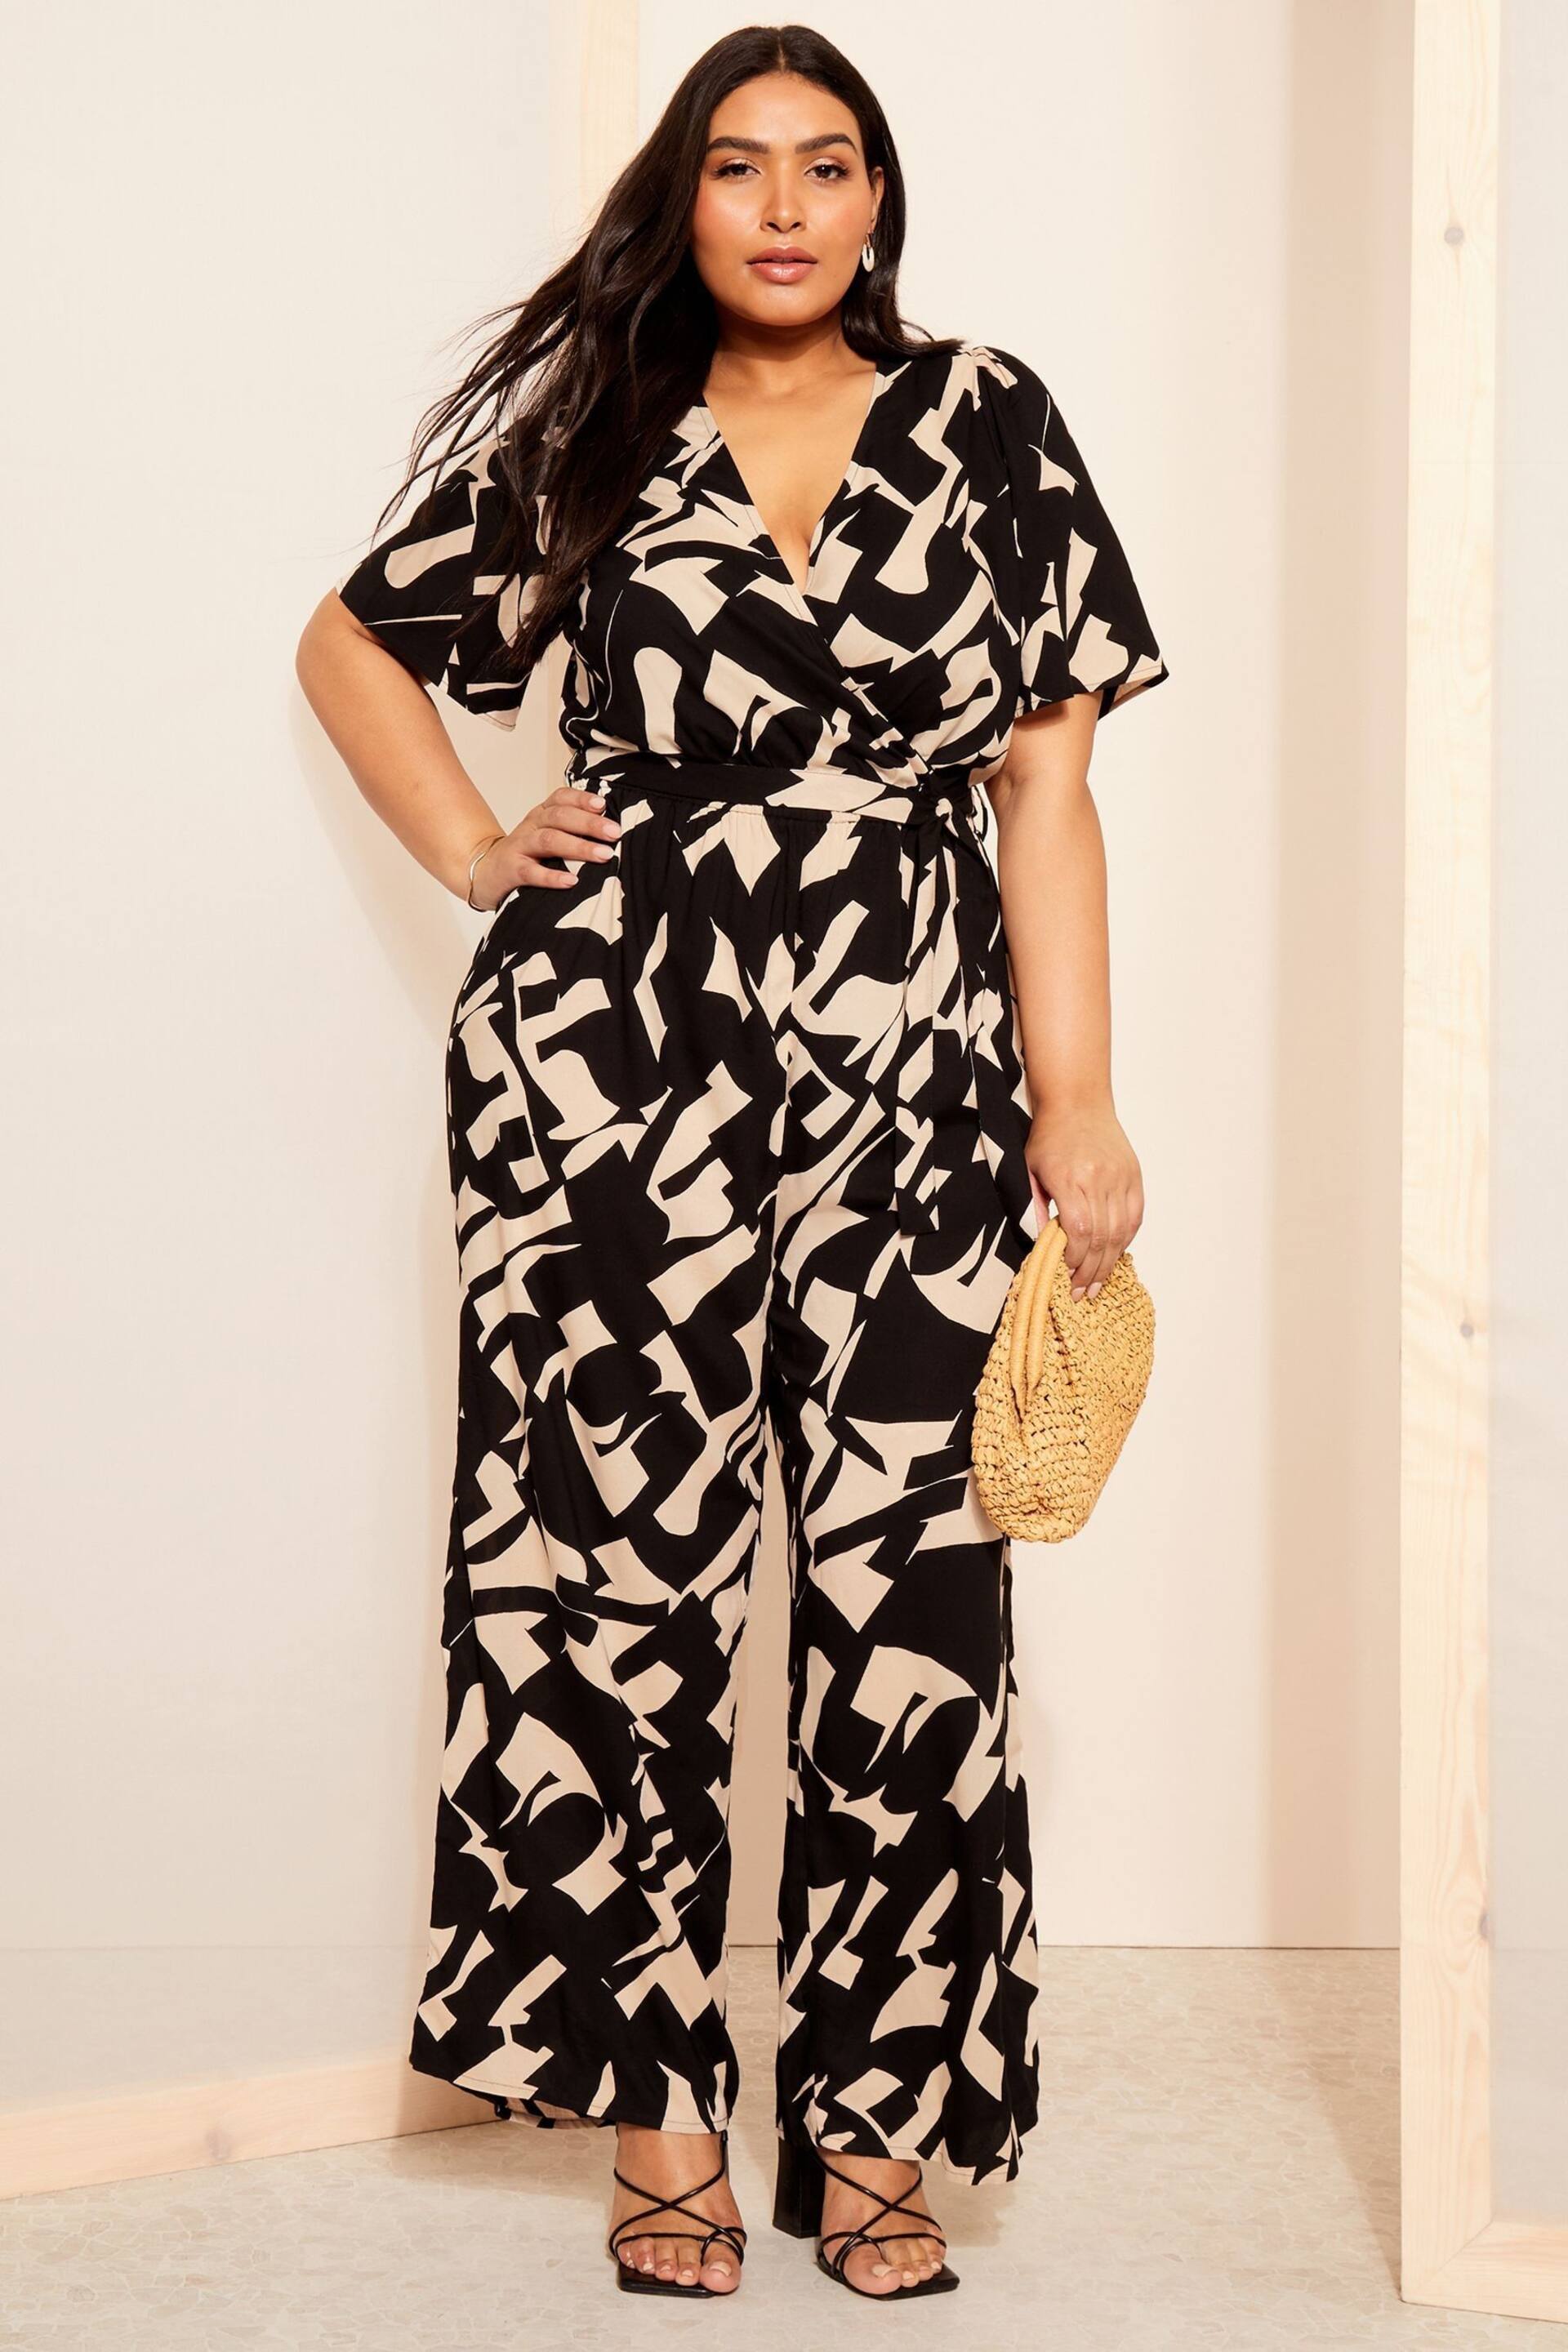 Curves Like These Black/White Flutter Sleeve Wide Leg Jumpsuit - Image 1 of 4